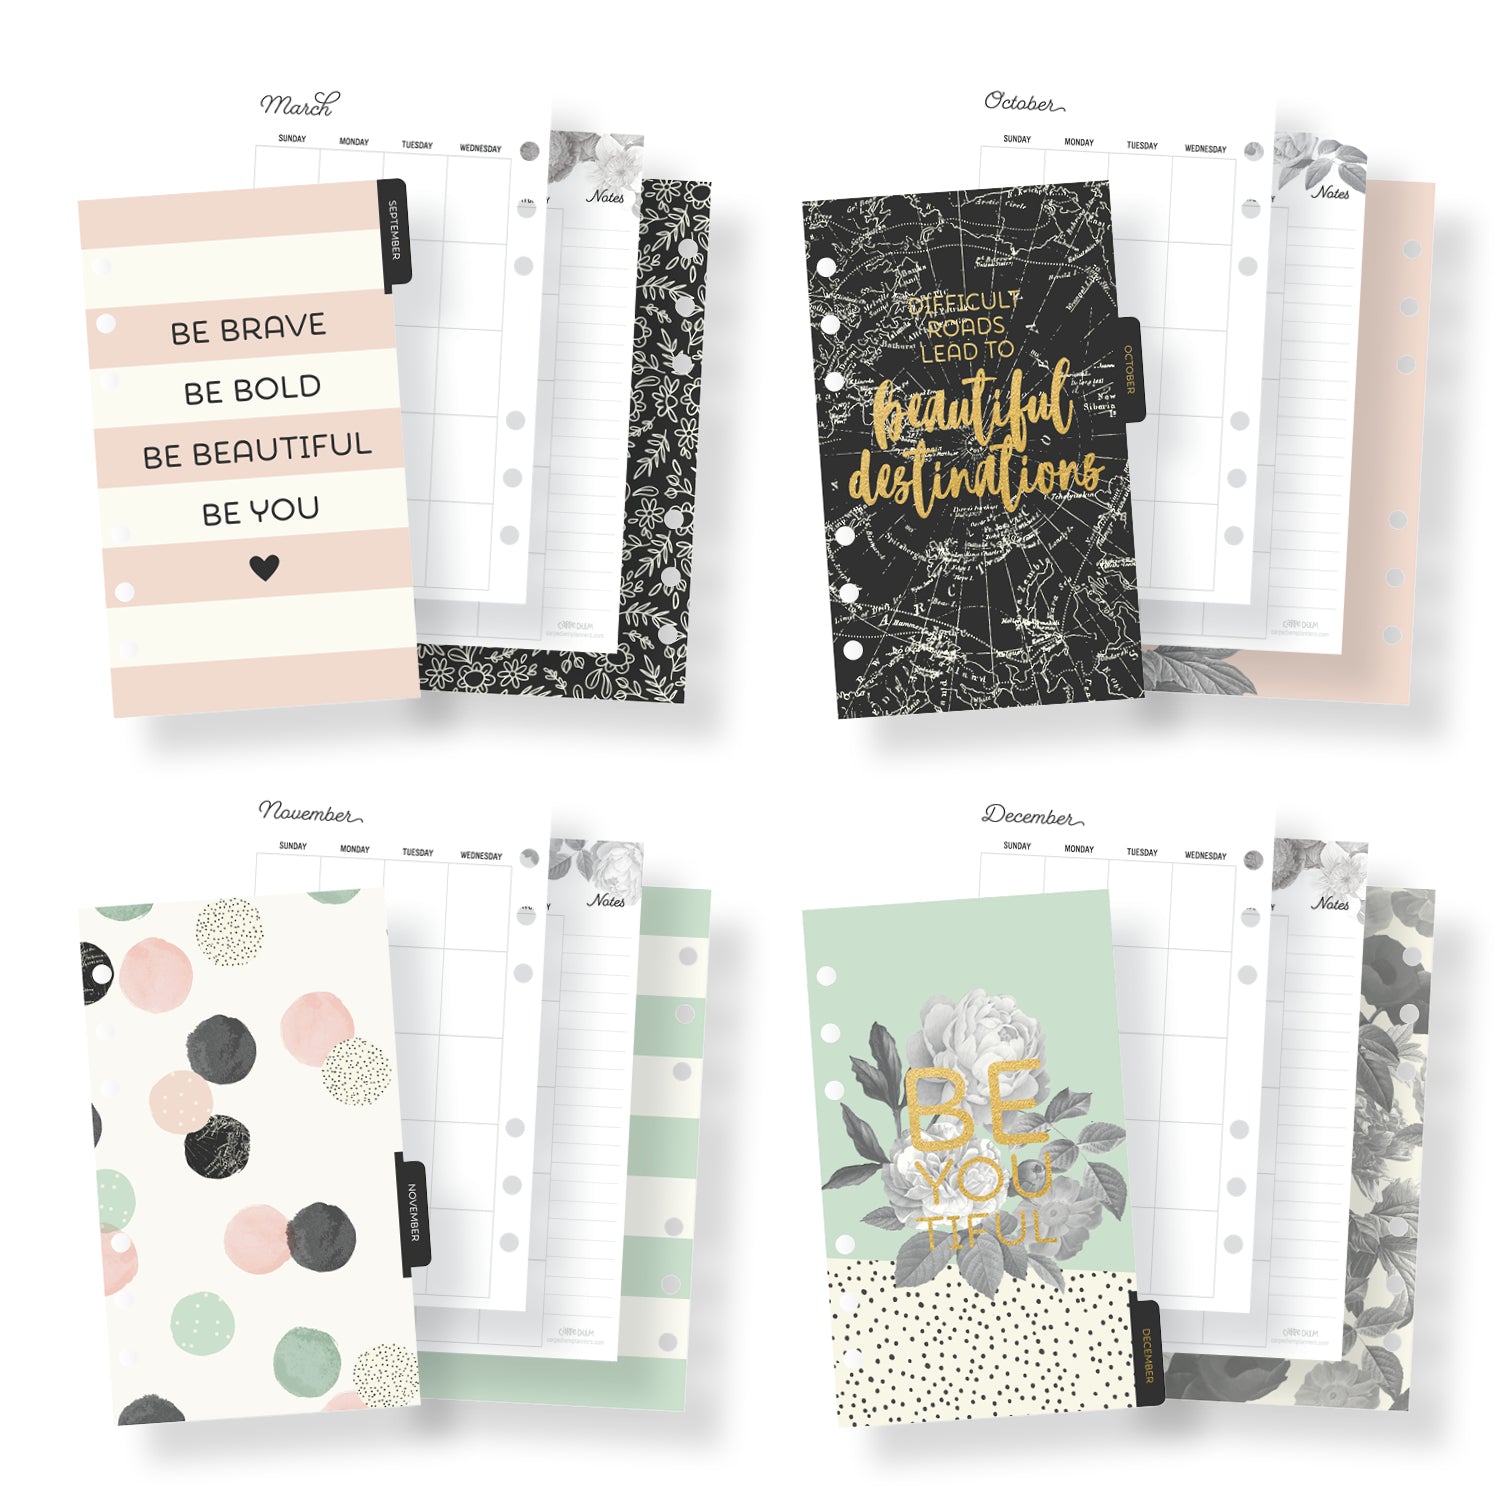 Personal Planner Monthly Calendar Inserts